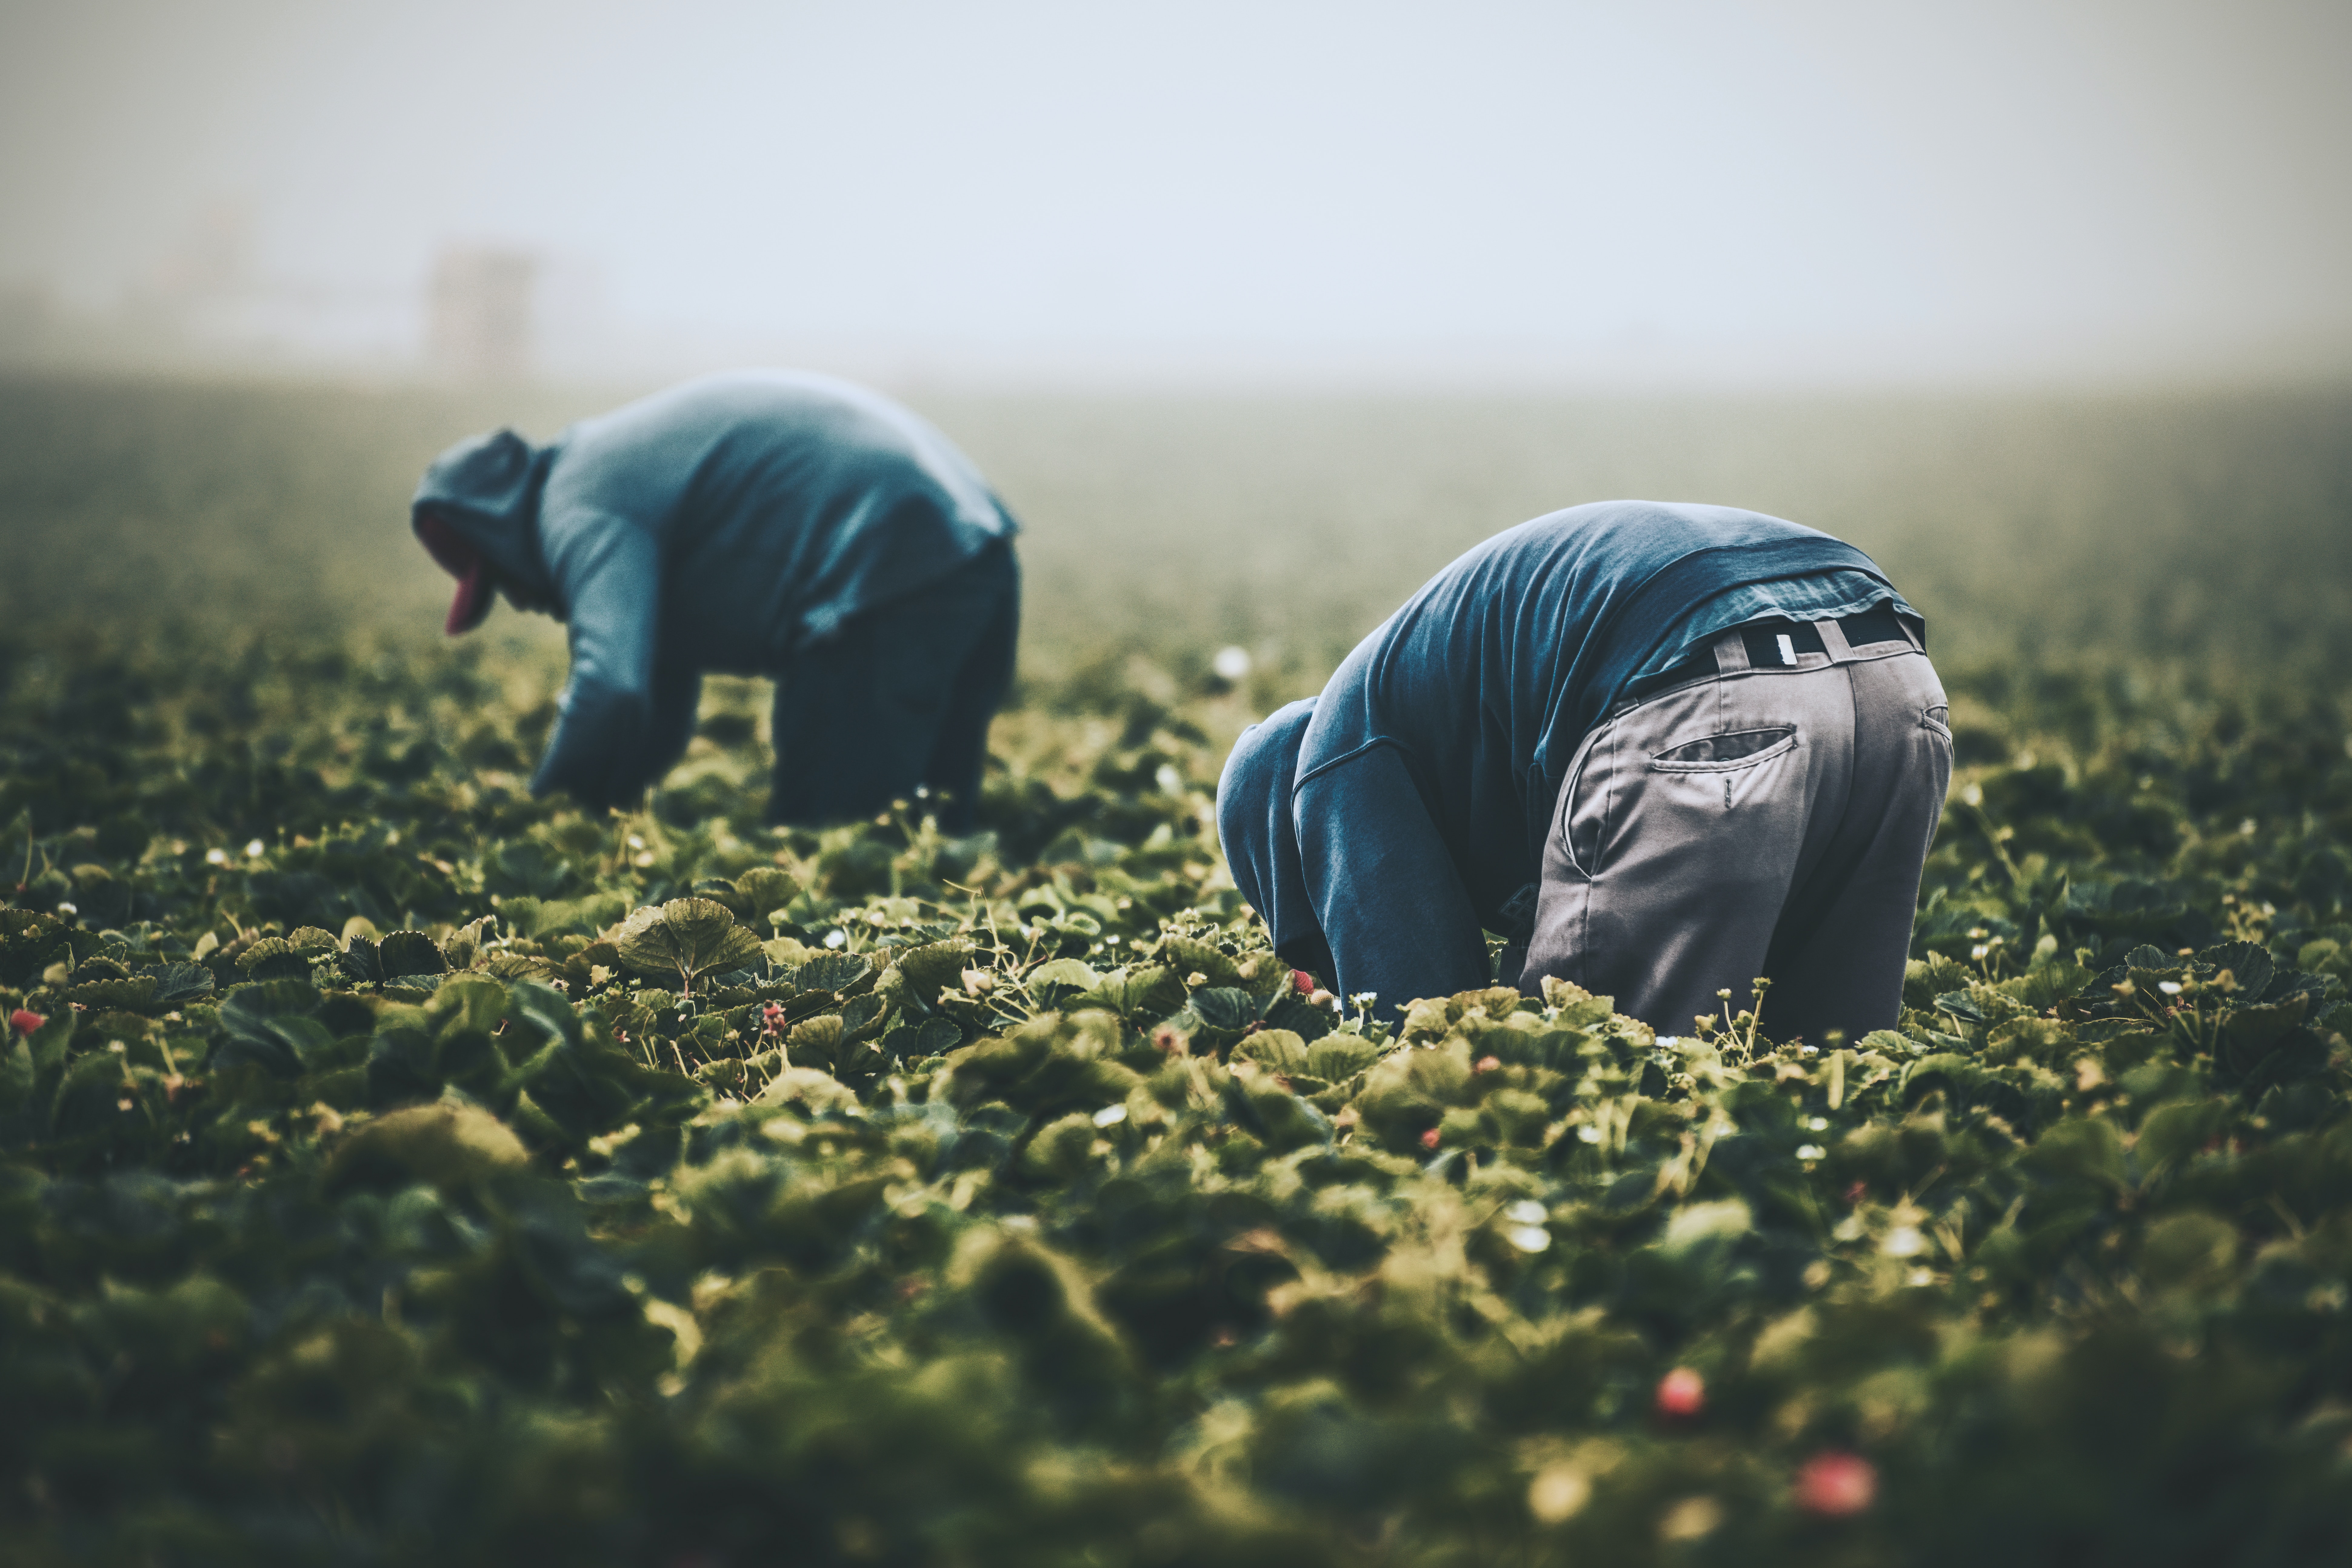 Workers in the field